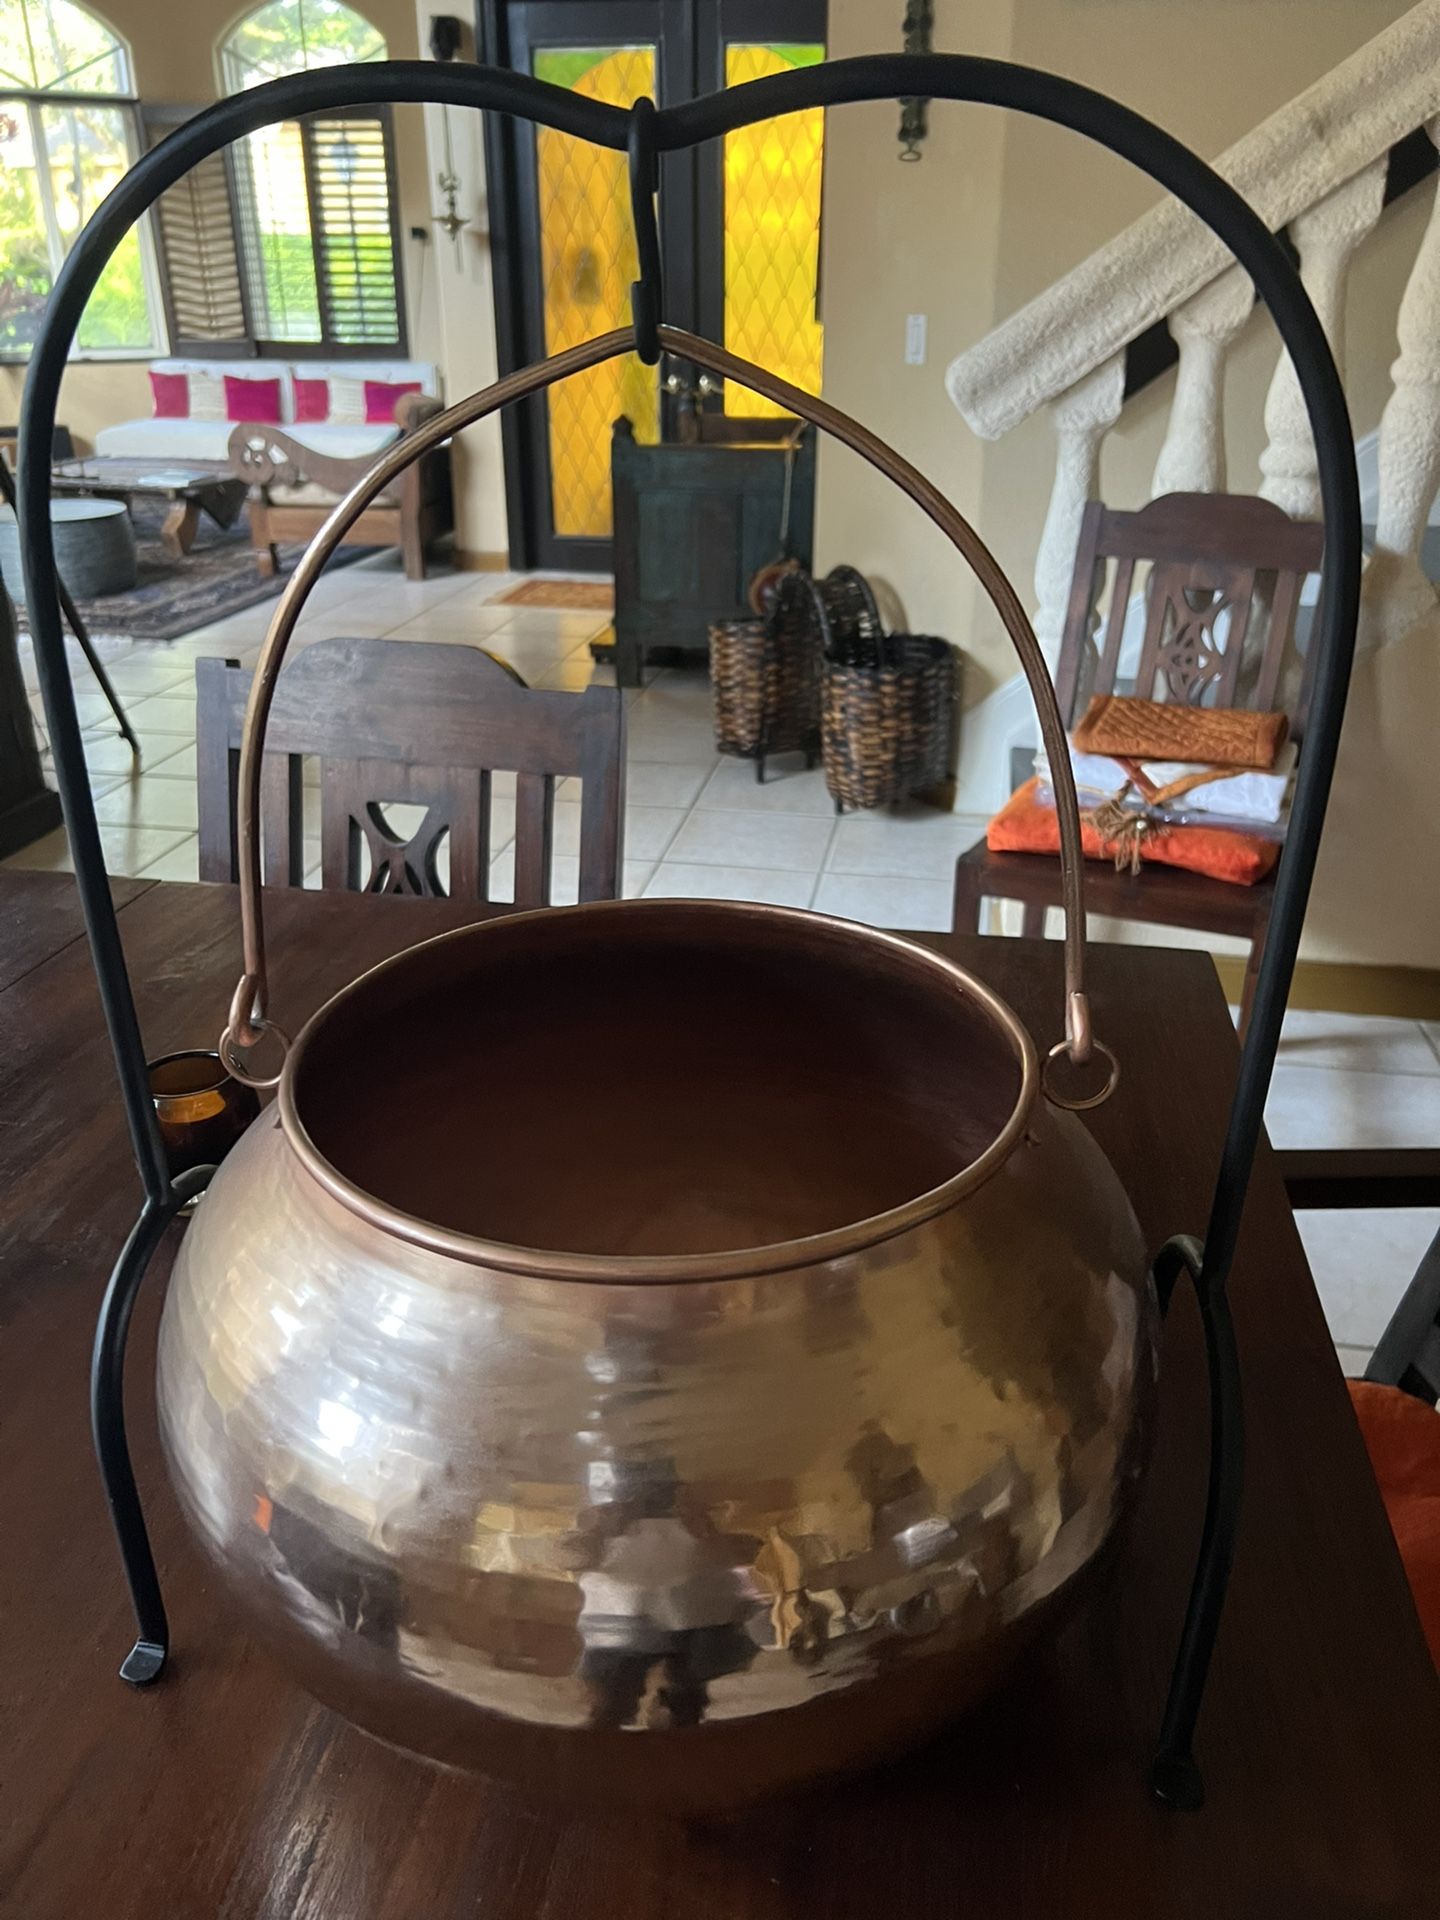 Copper Display Pot With stand